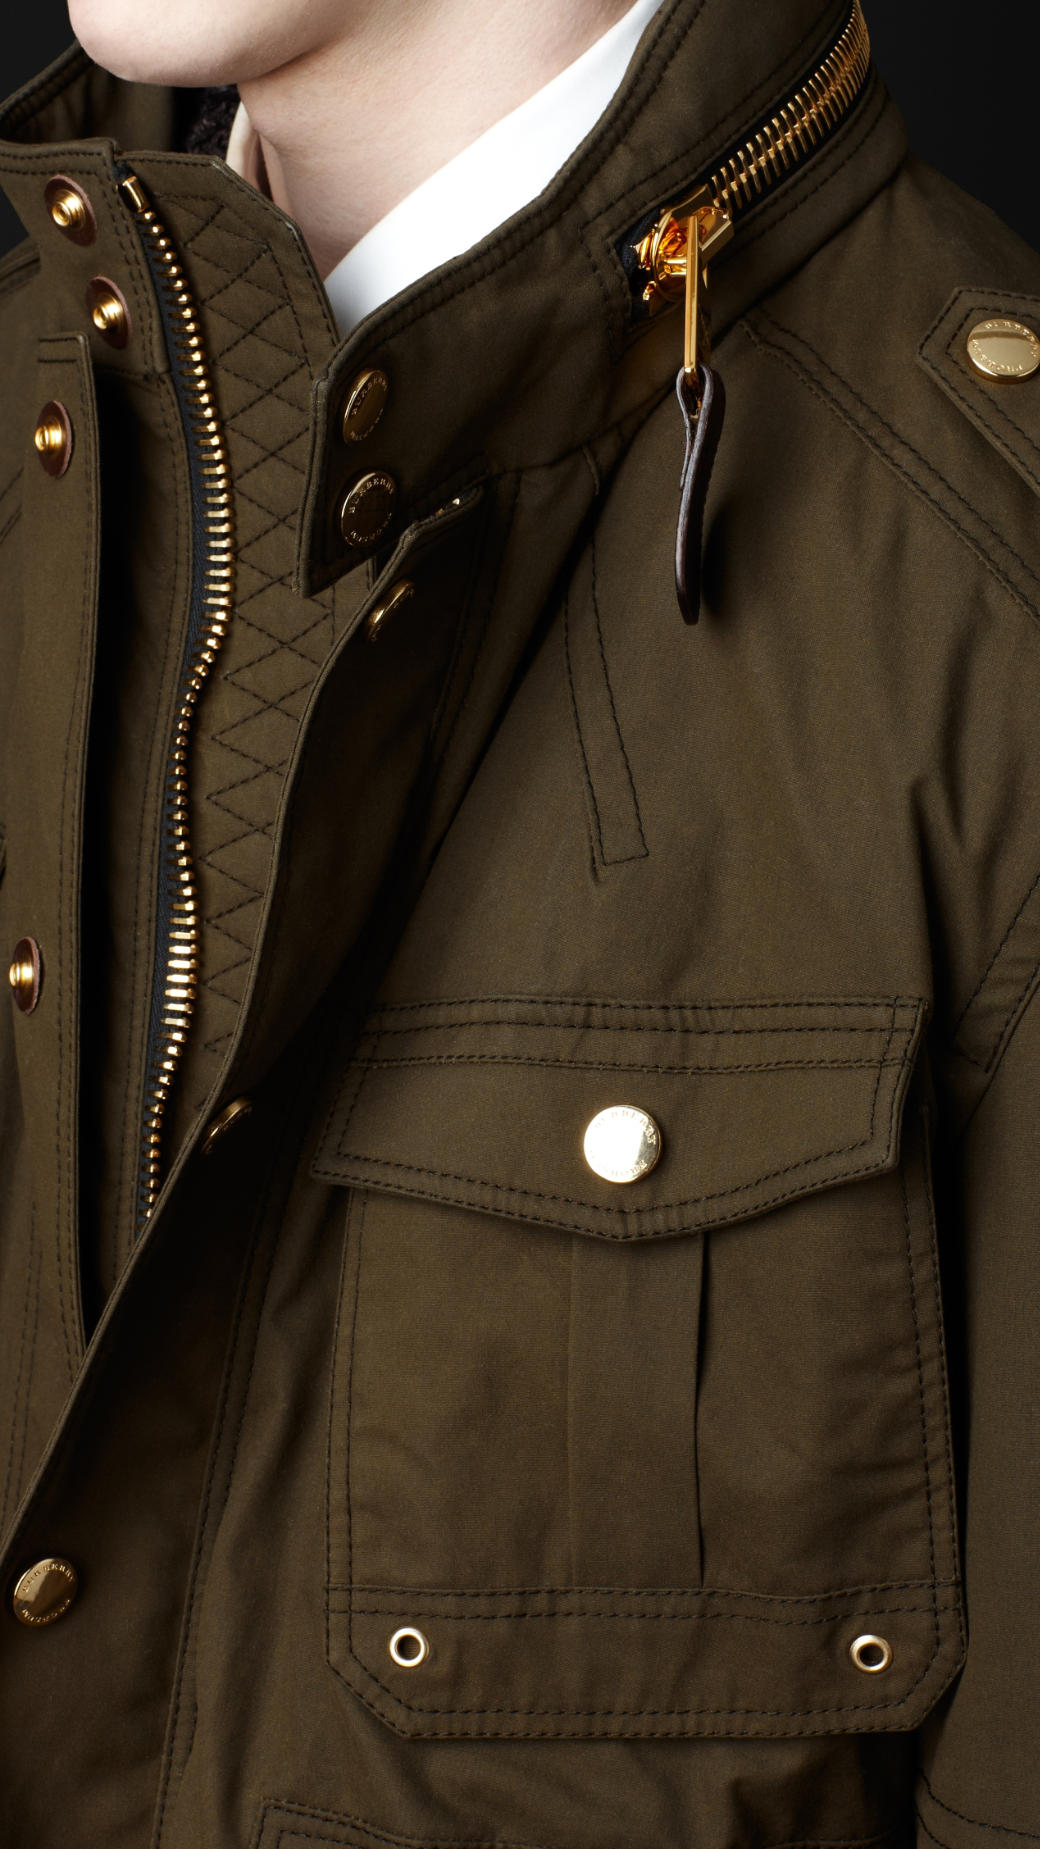 Lyst - Burberry prorsum Waxed Cotton Field Jacket in Brown for Men